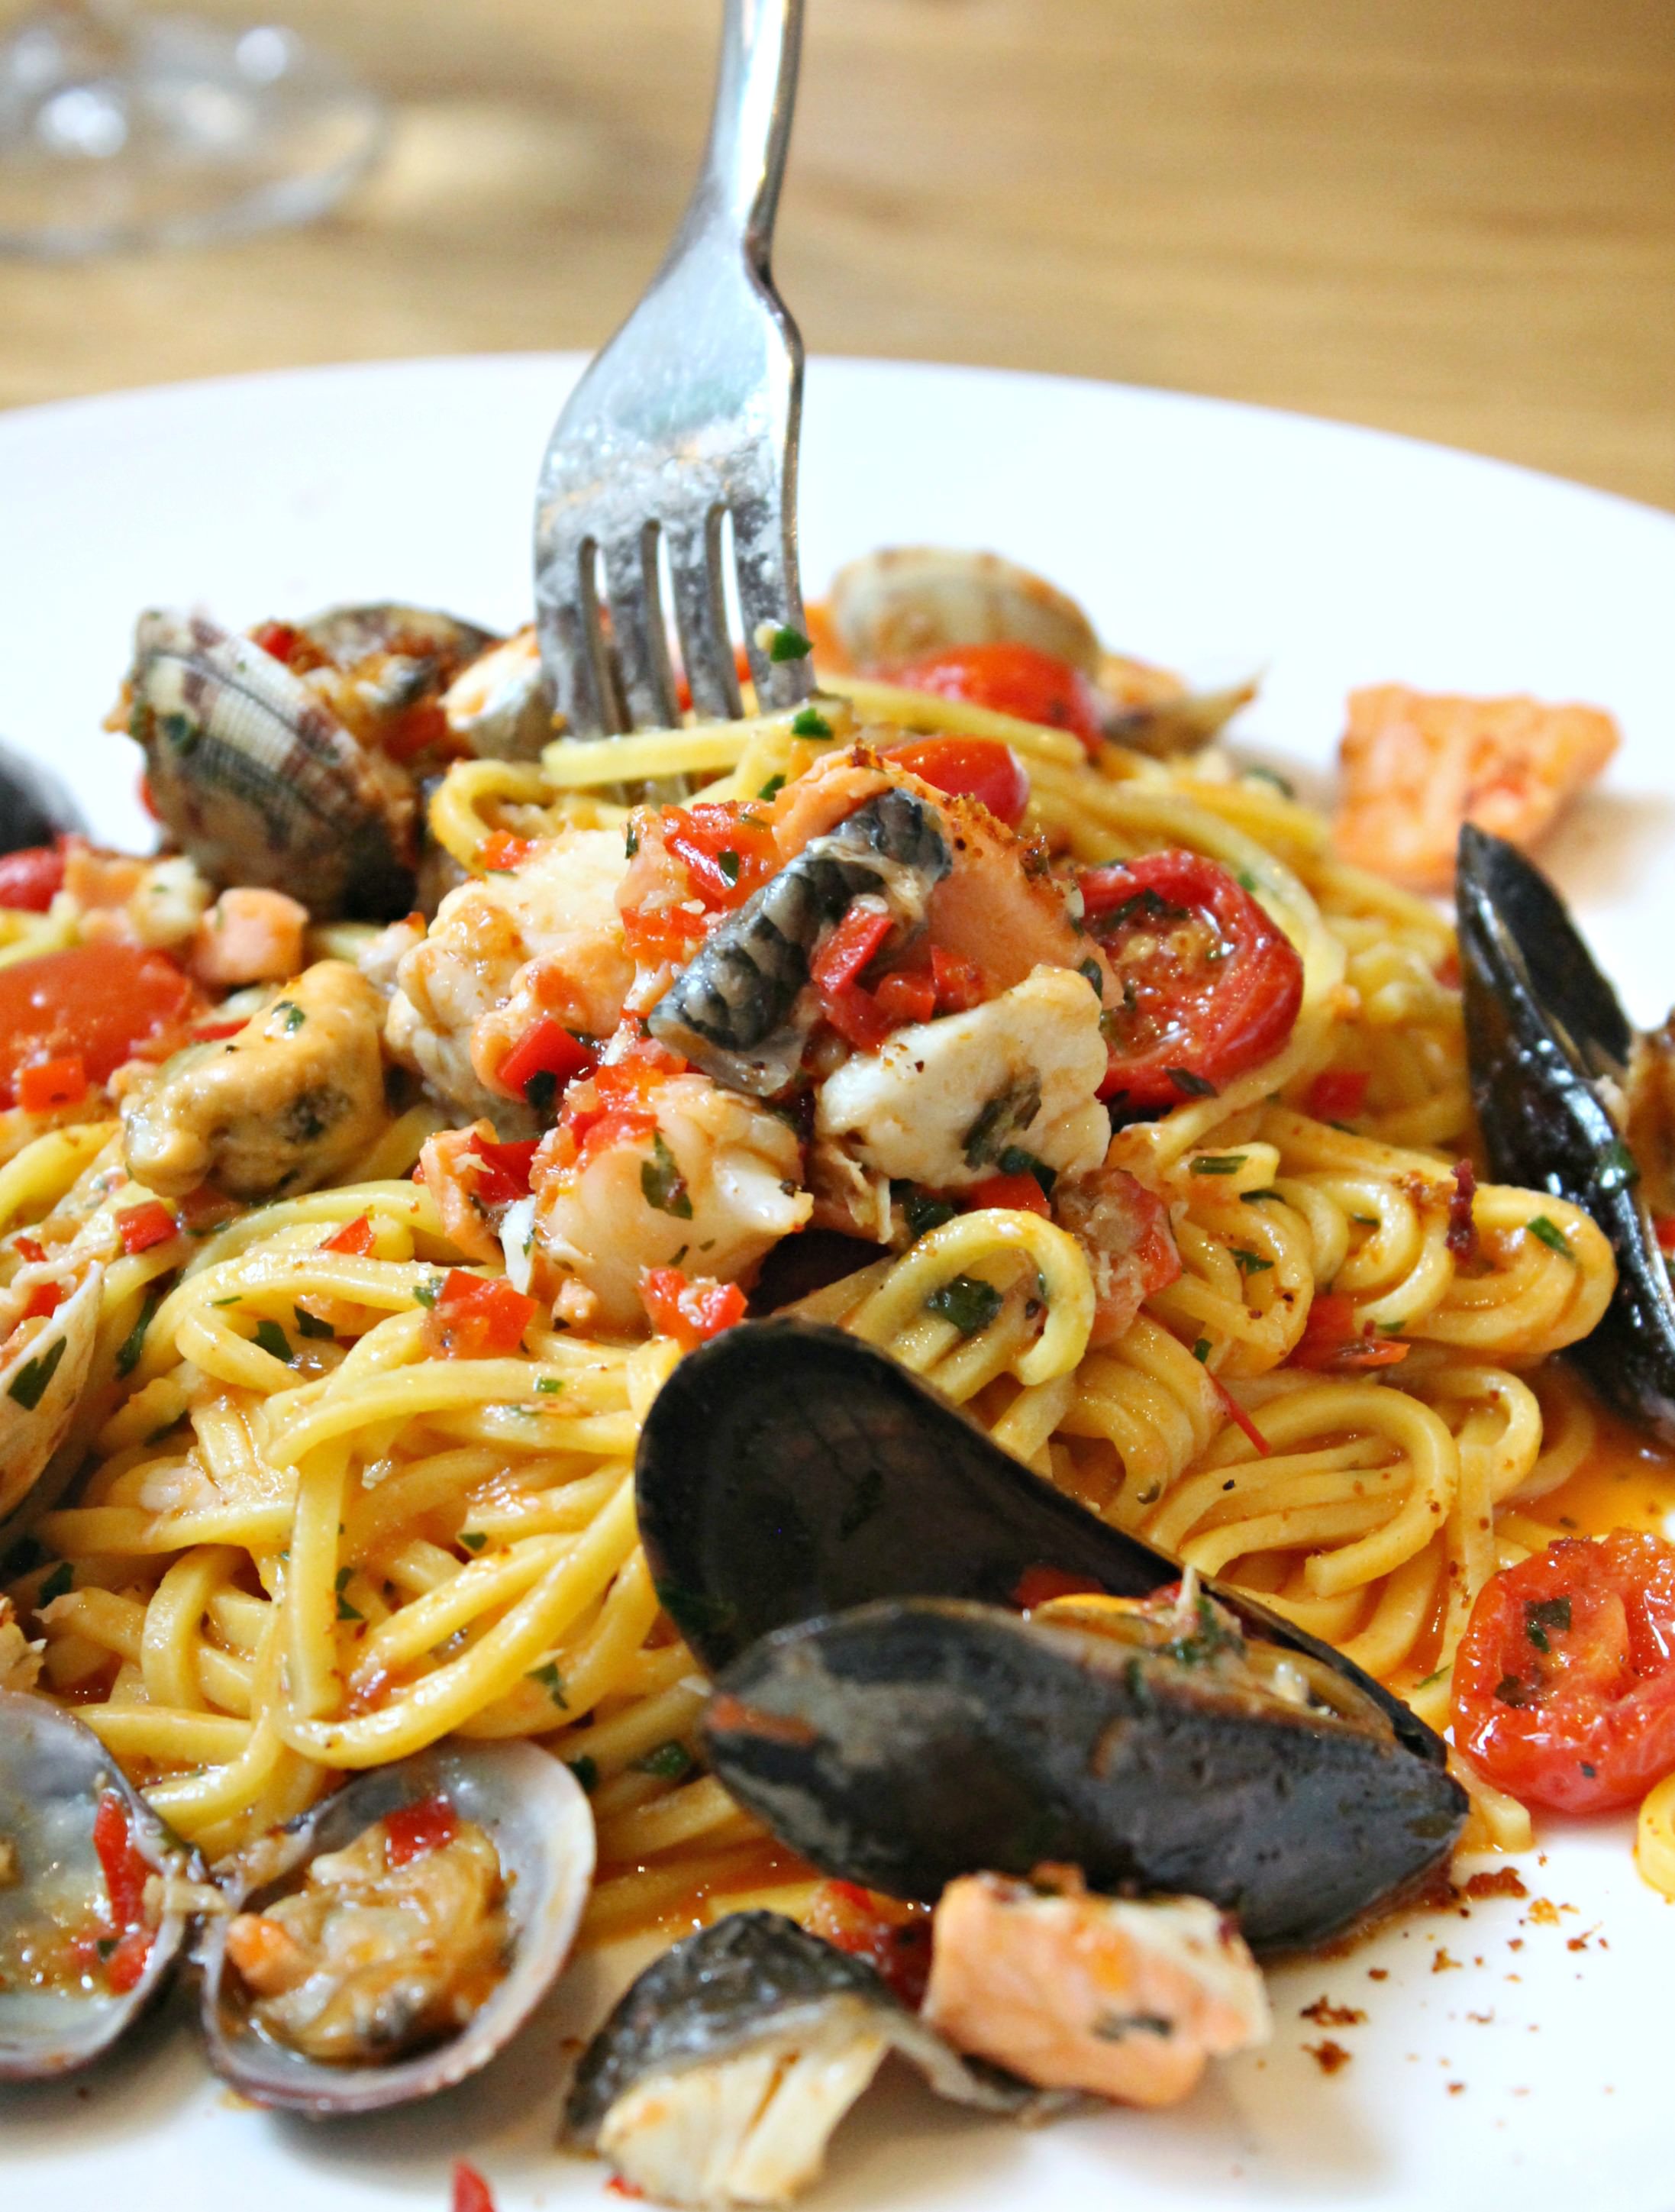 Linguini-with-clams-at-Theo's-simple-Italian-photo-by-Little-Big-Bell